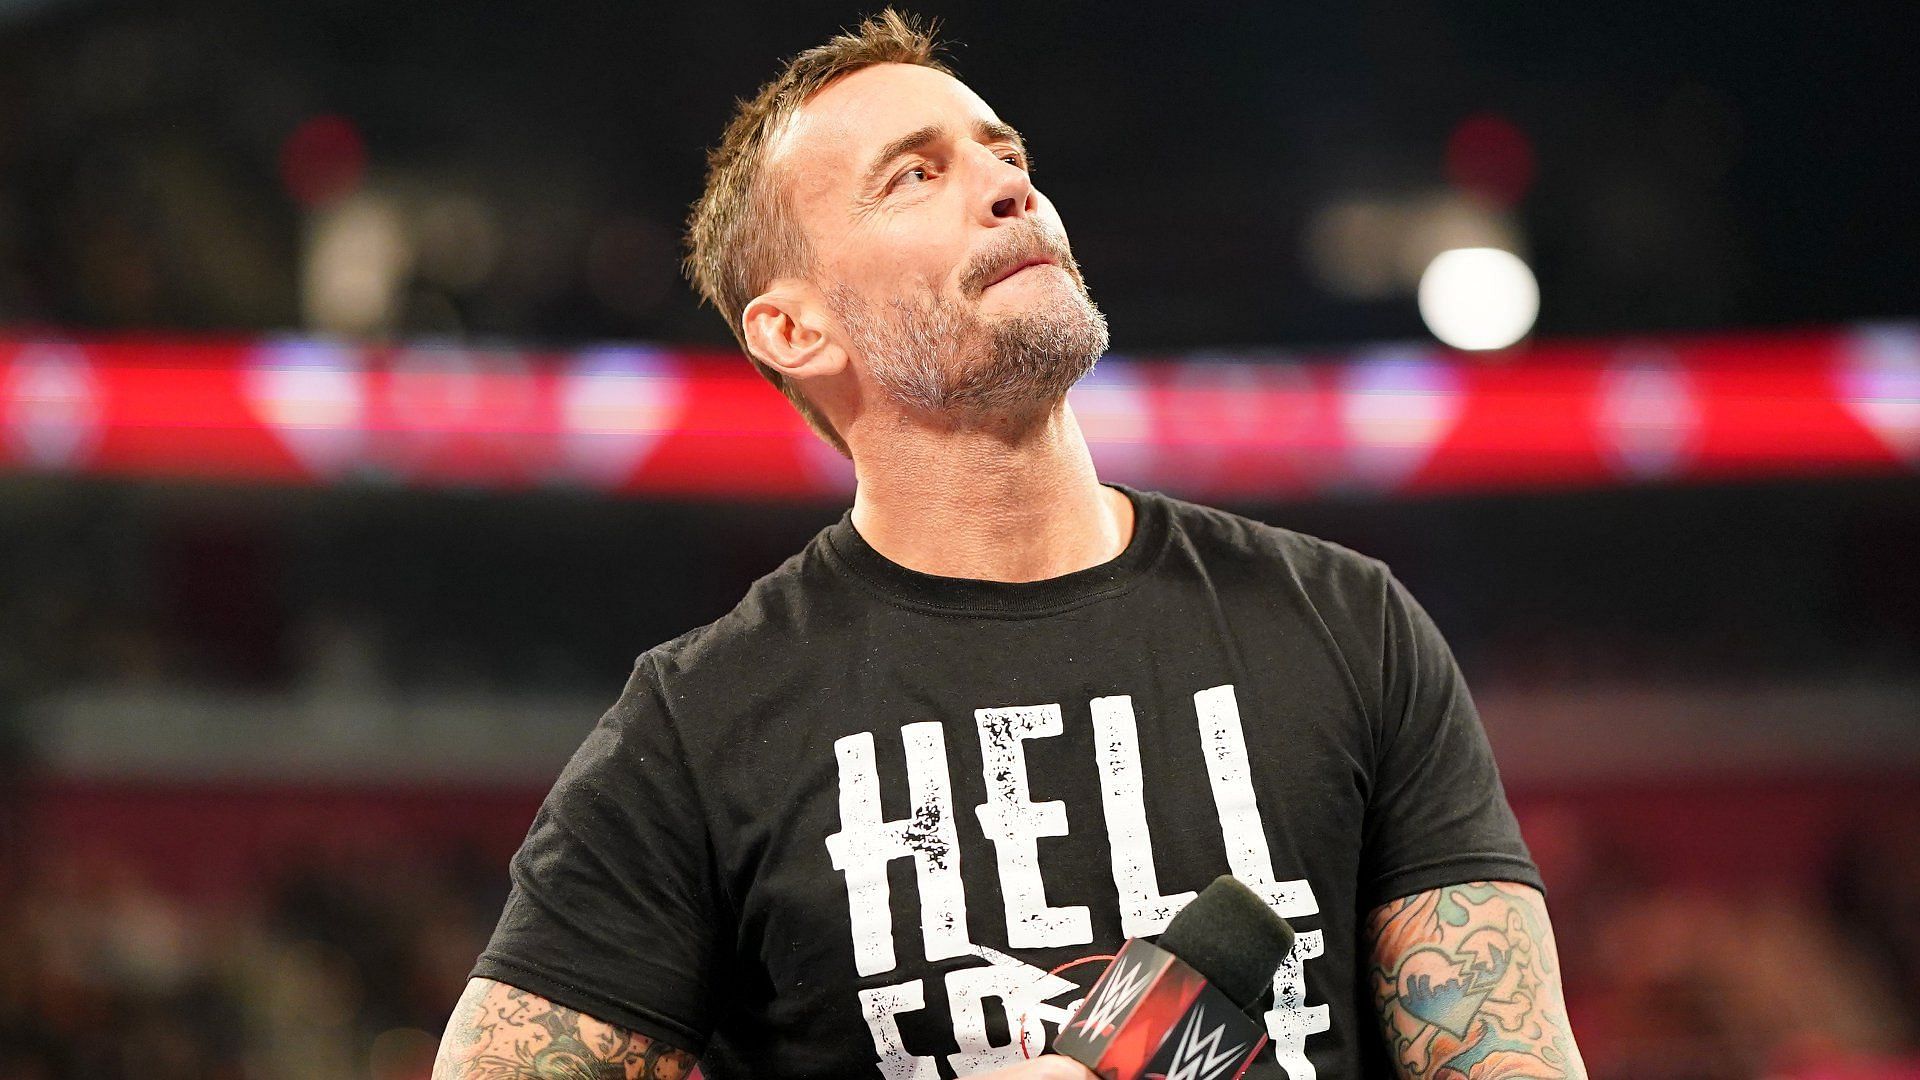 CM Punk was spotted at a WWE show